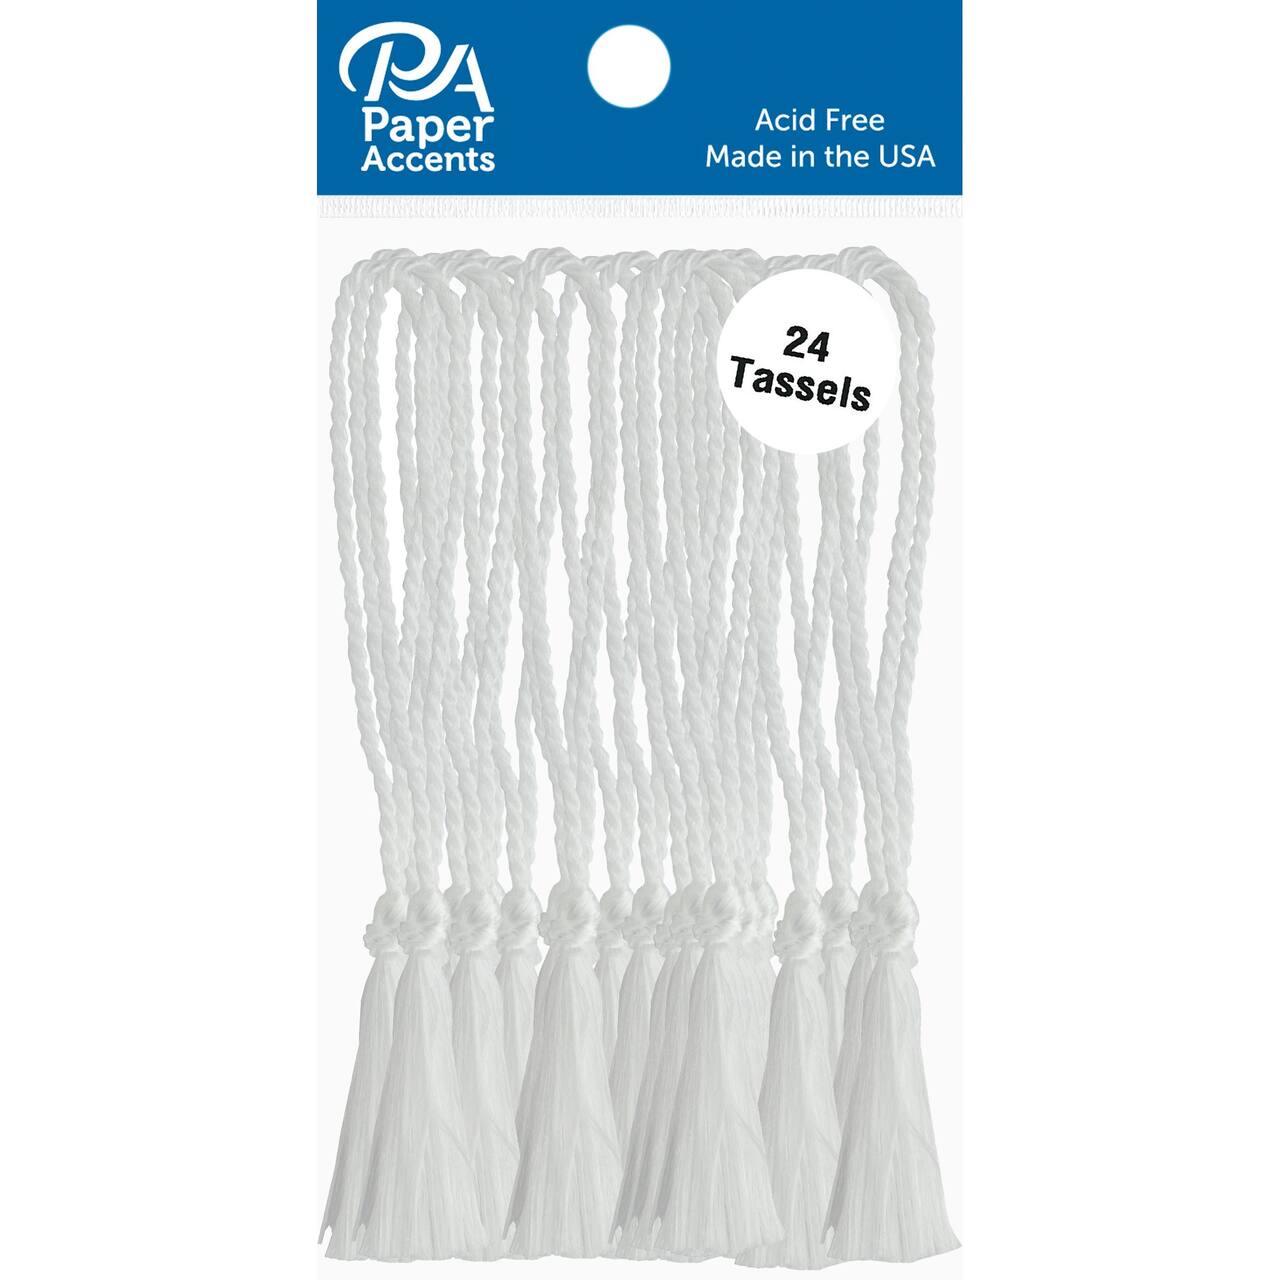 PA Paper&#x2122; Accents White Tassels, 24ct.